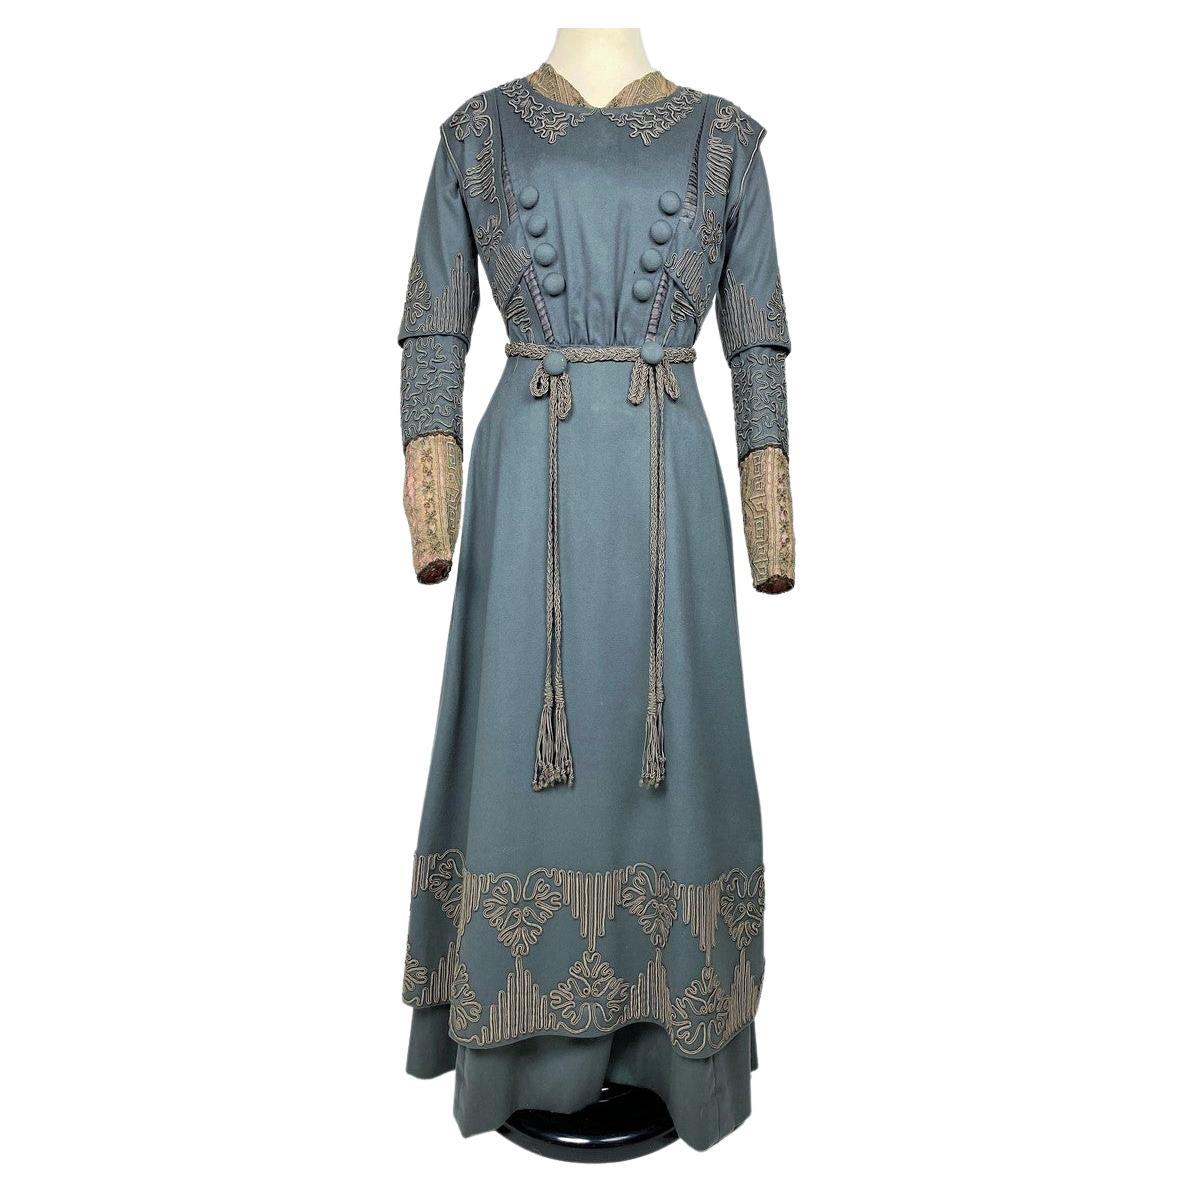 A Grey Wool Afternoon Gown with Appliqué trimmings and Lace Circa 1905-1910 For Sale